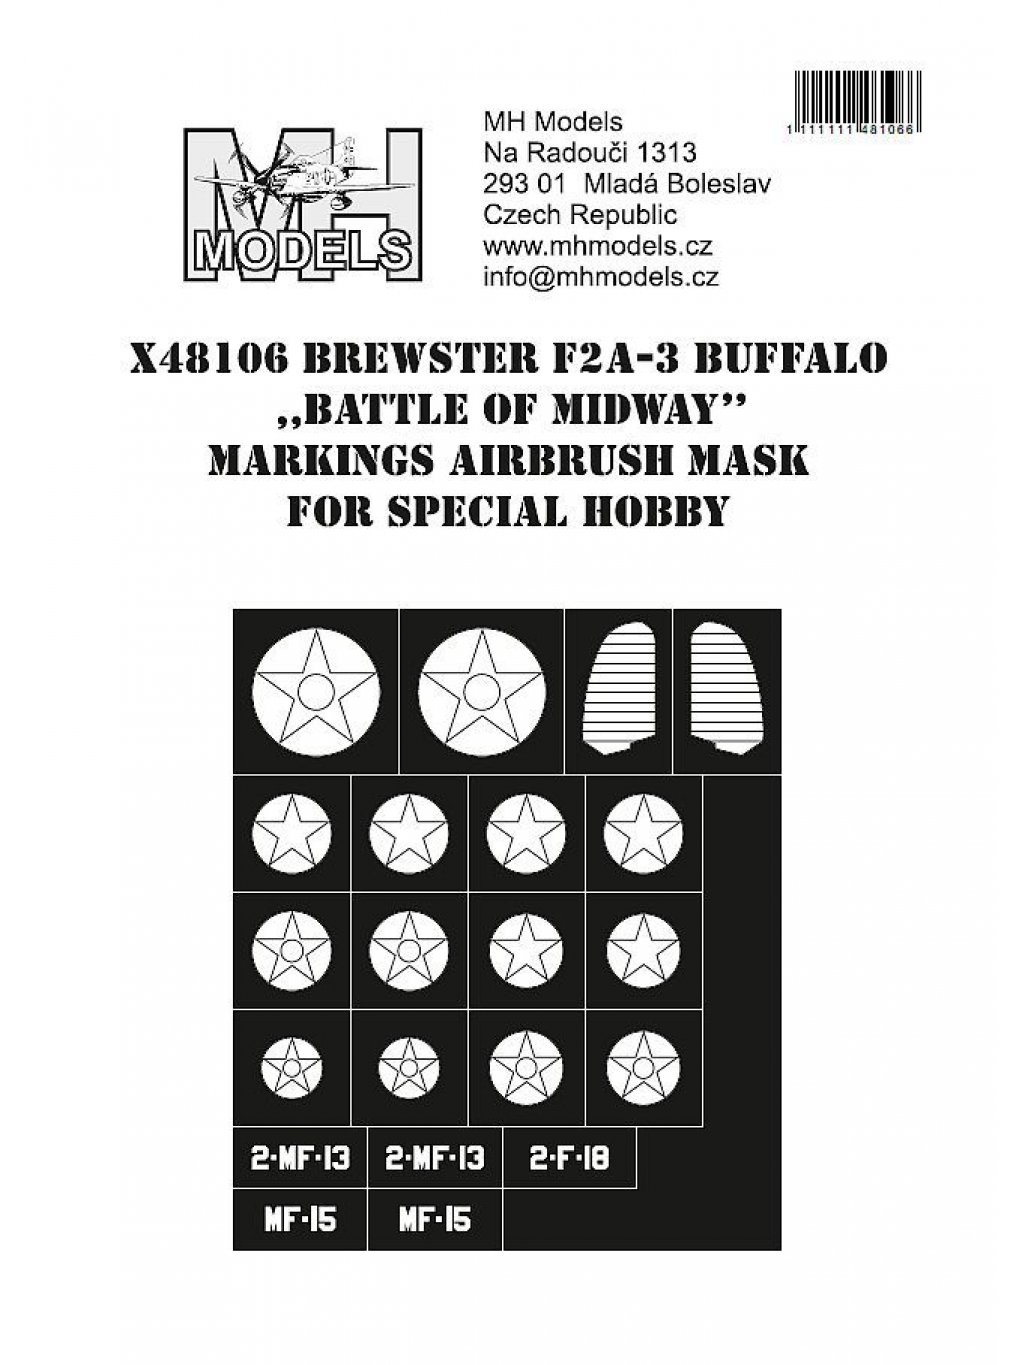 Brewster F2A-3 Buffalo ,,Battle of Midway" Markings airbrush mask for Special Hobby.